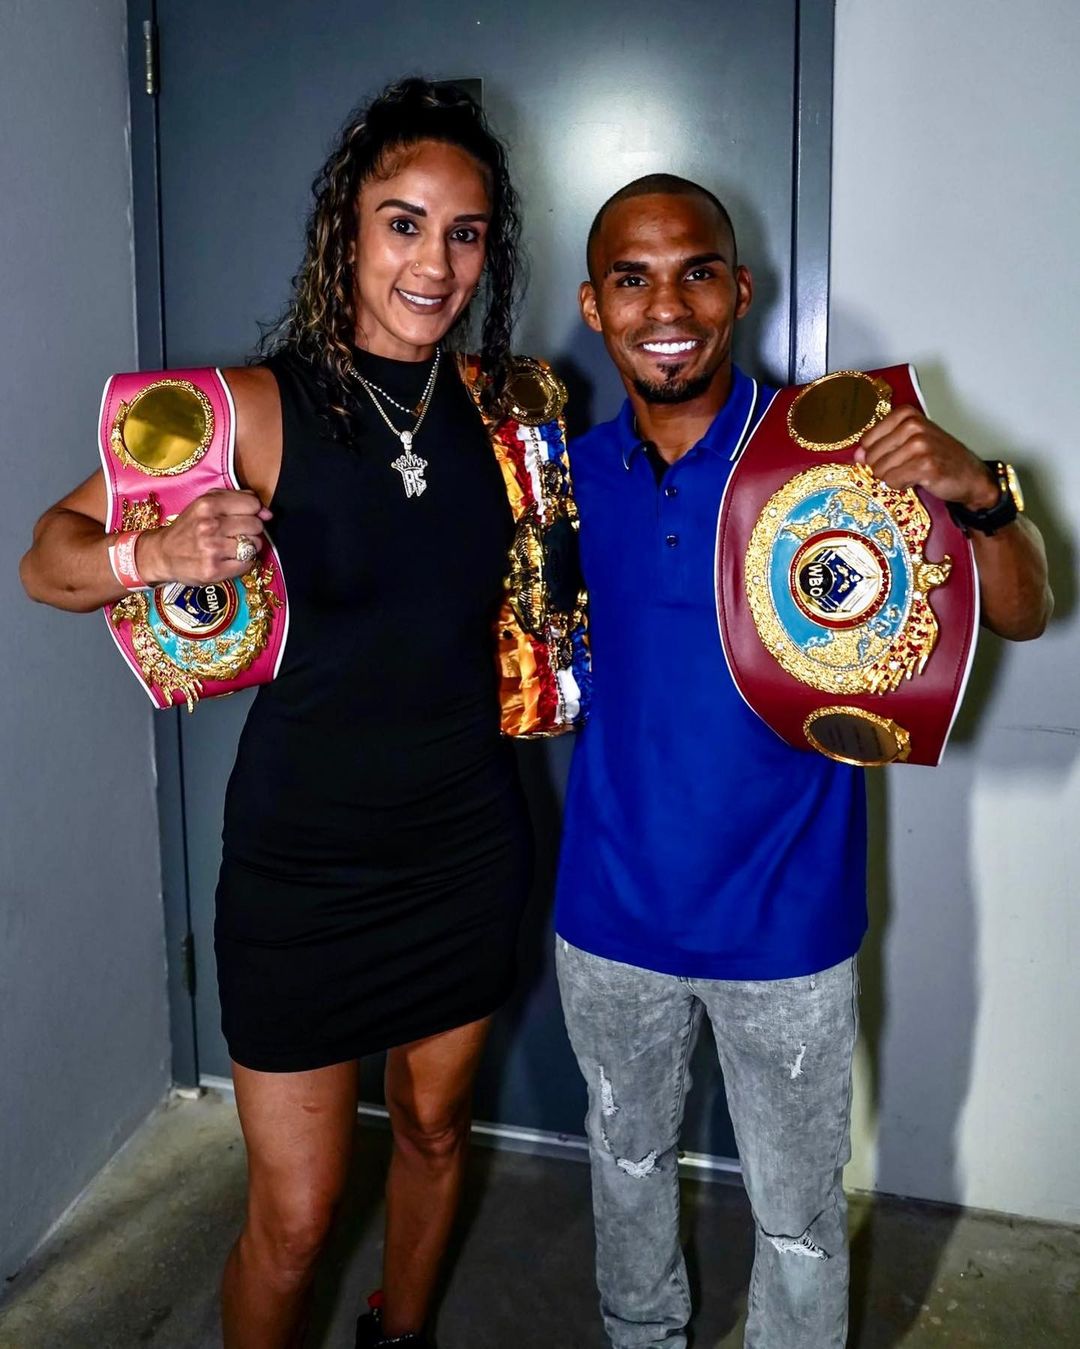 One of the most prominent figures on the world boxing scene in recent years, Puerto Rican boxer Amanda Serrano has made the decision to give up her title of world champion granted by the World Boxing Council (WBC). (Photo:Instagram)